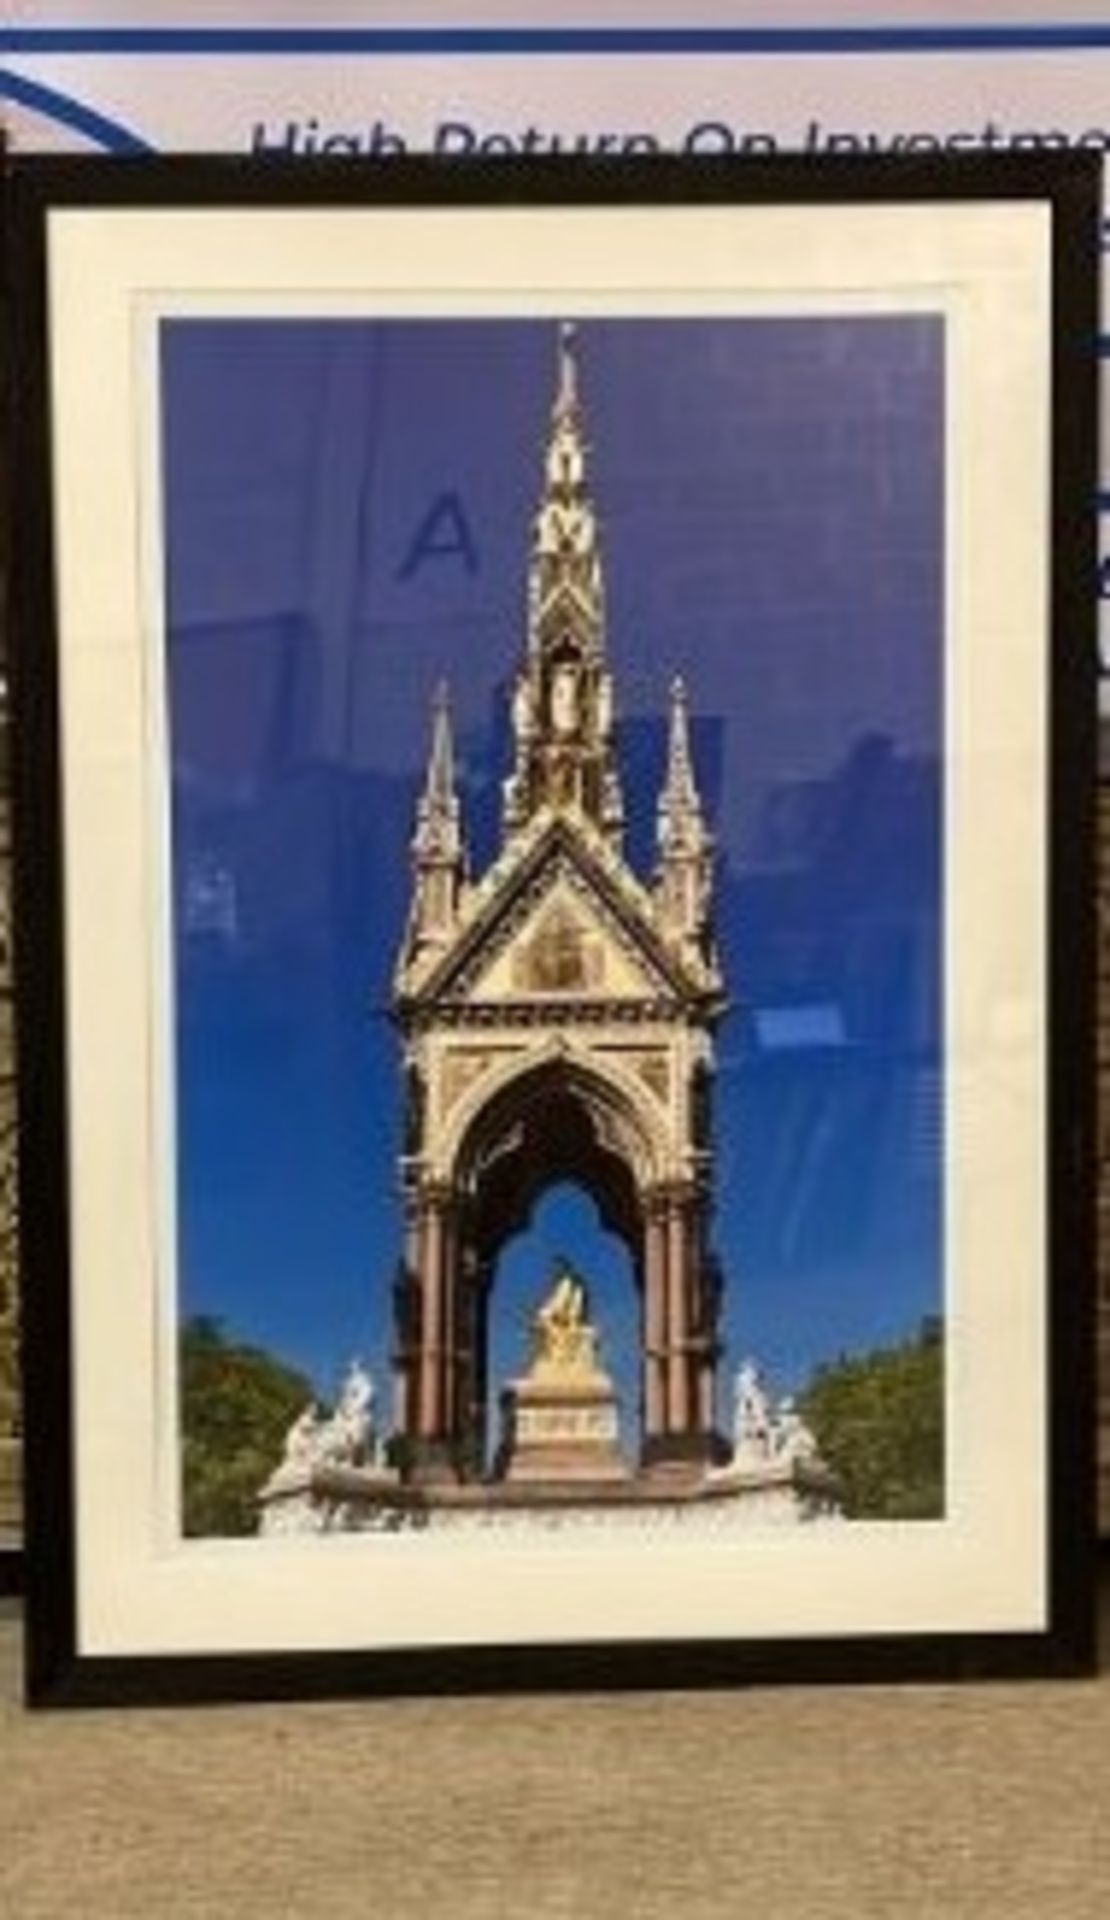 The Albert Memorial London Framed And Signed Limited Edition Photographic Print By Martin Smith